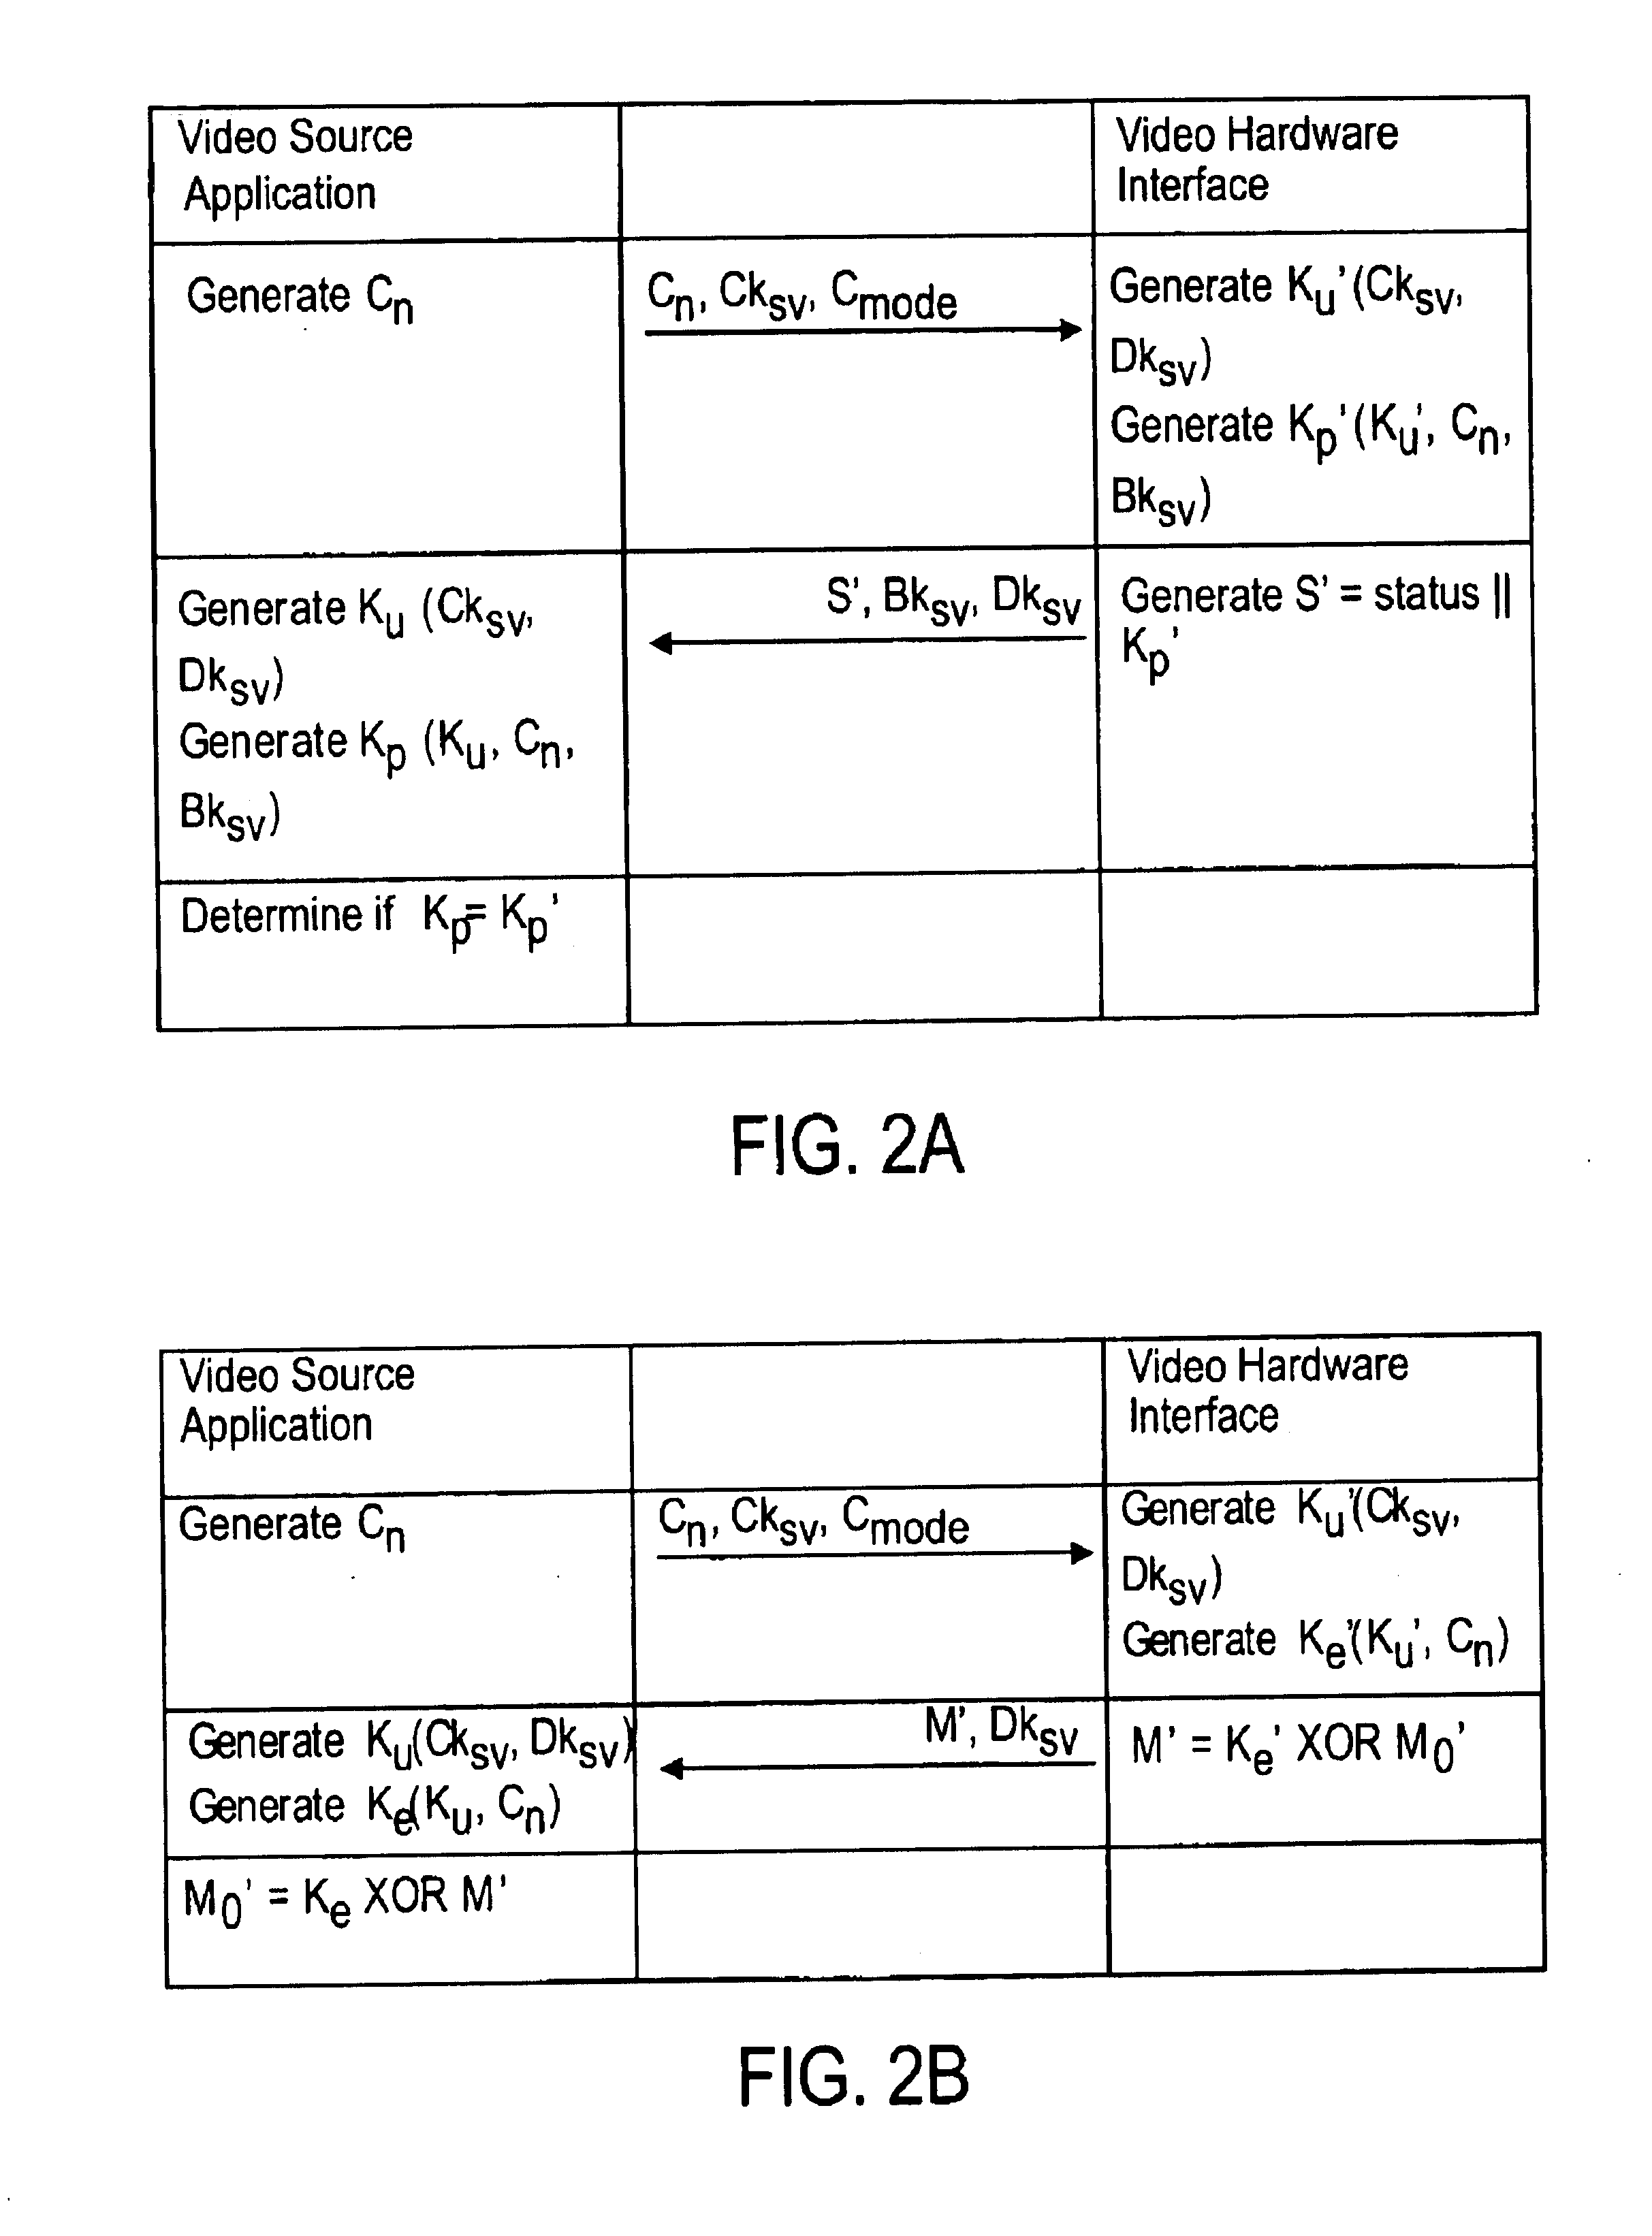 Method and apparatus for protected exchange of status and secret values between a video source application and a video hardware interface